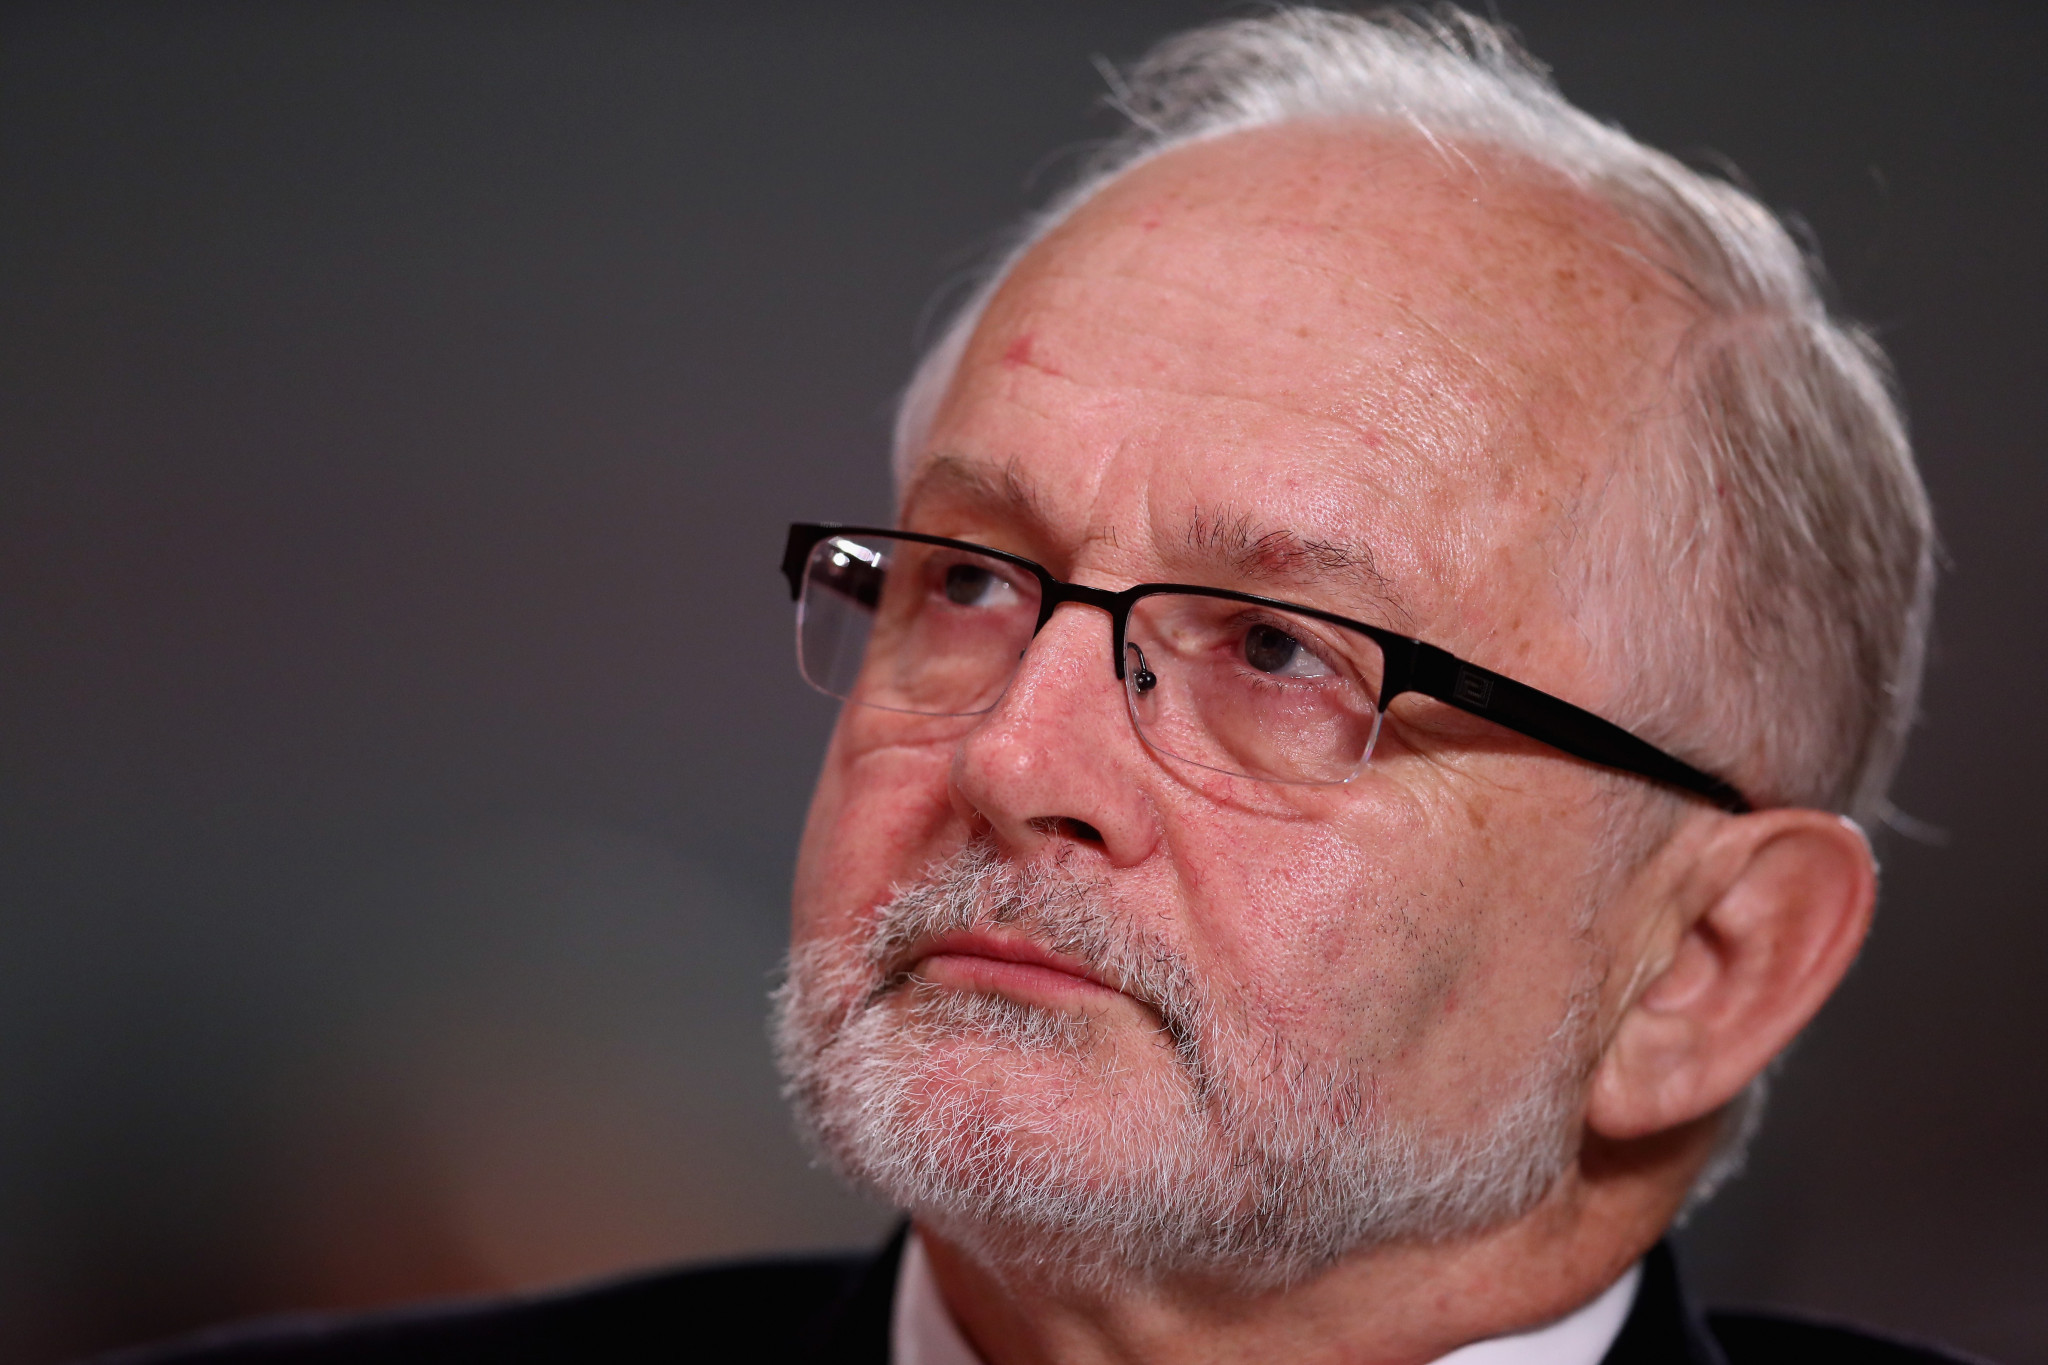 IPC file police complaint after phone calls from Russian hoaxer claiming to be Sir Philip Craven